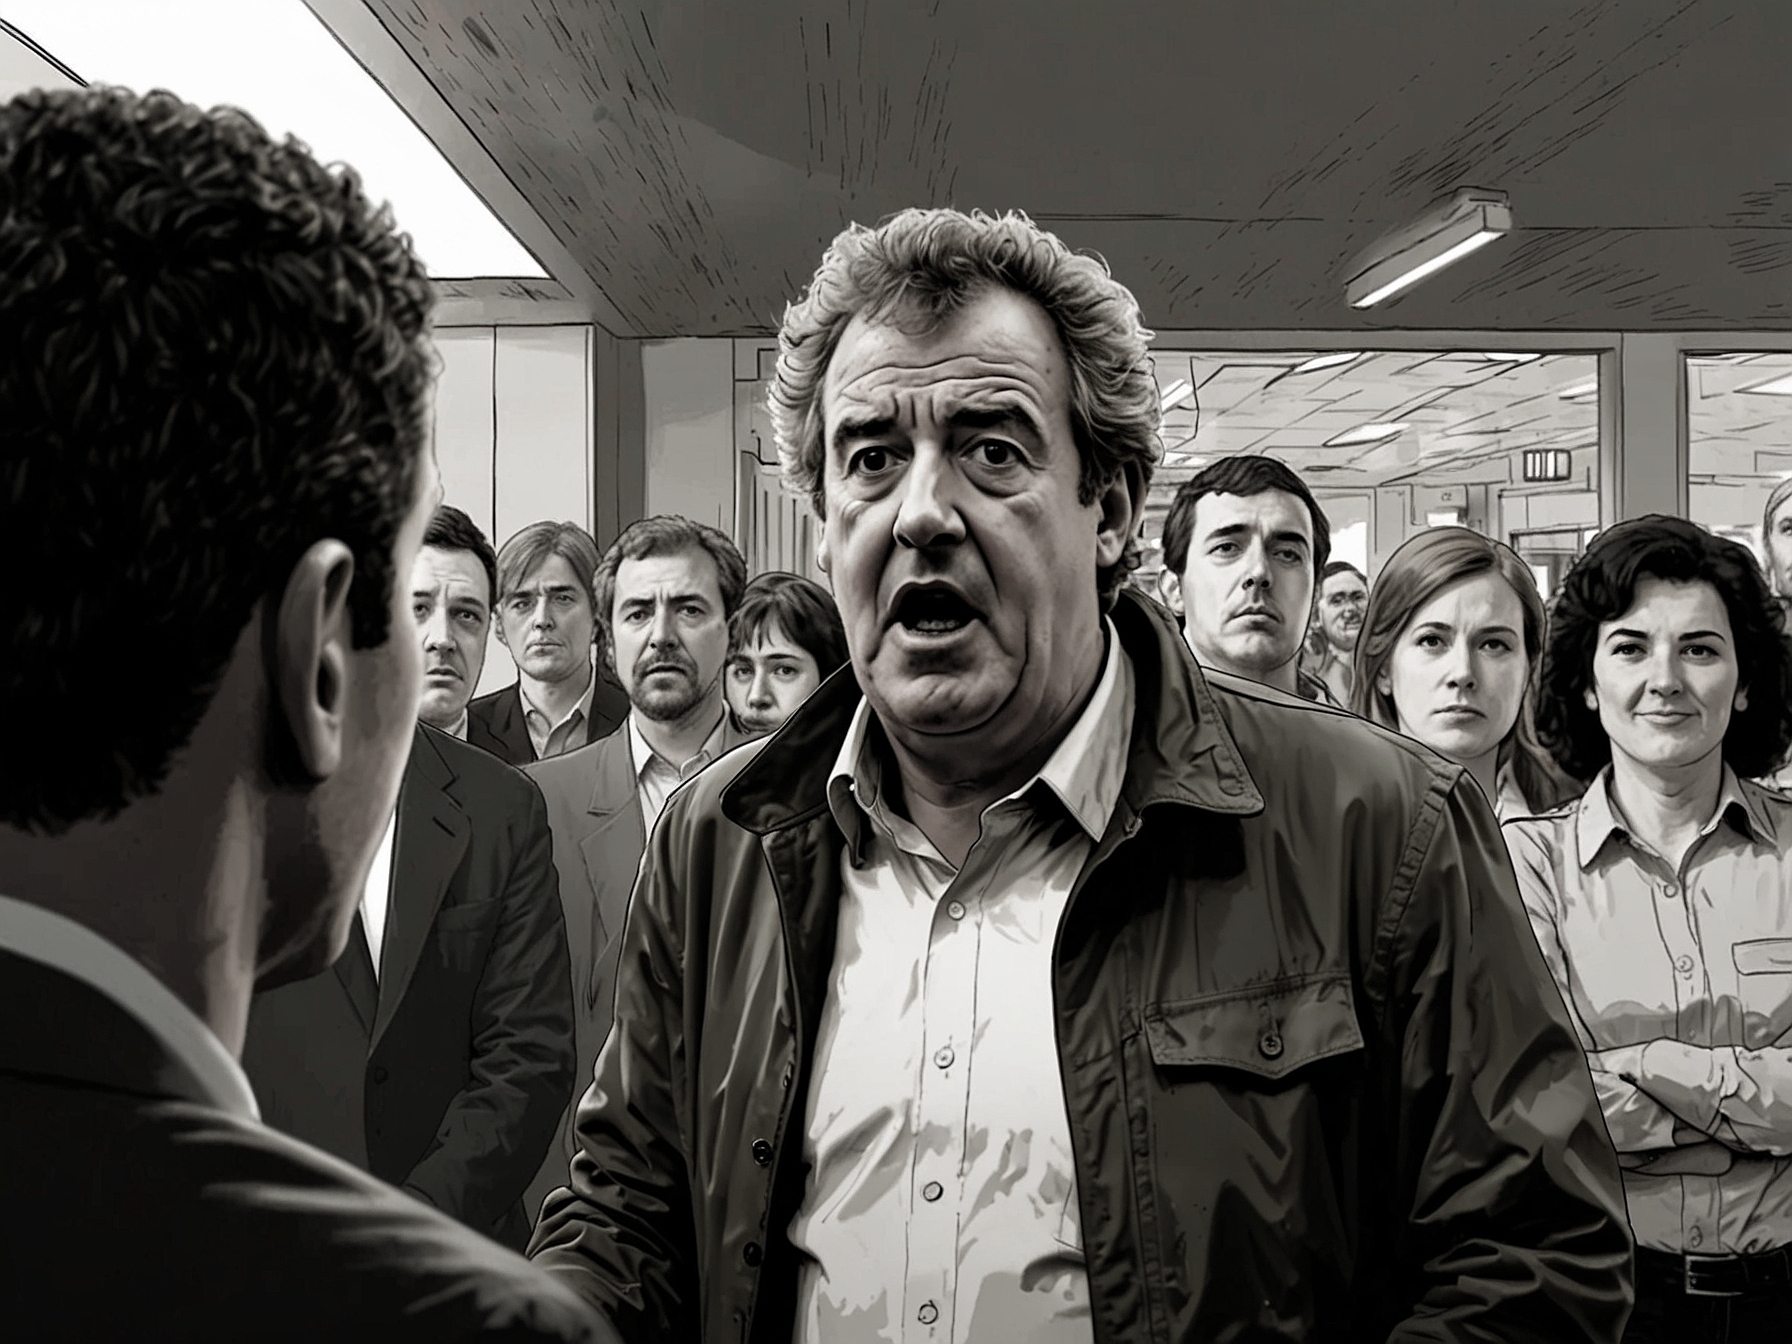 An image showing Jeremy Clarkson passionately speaking at an event or in an interview, symbolizing his firm stance against the police actions depicted in the viral video involving the escaped cow.